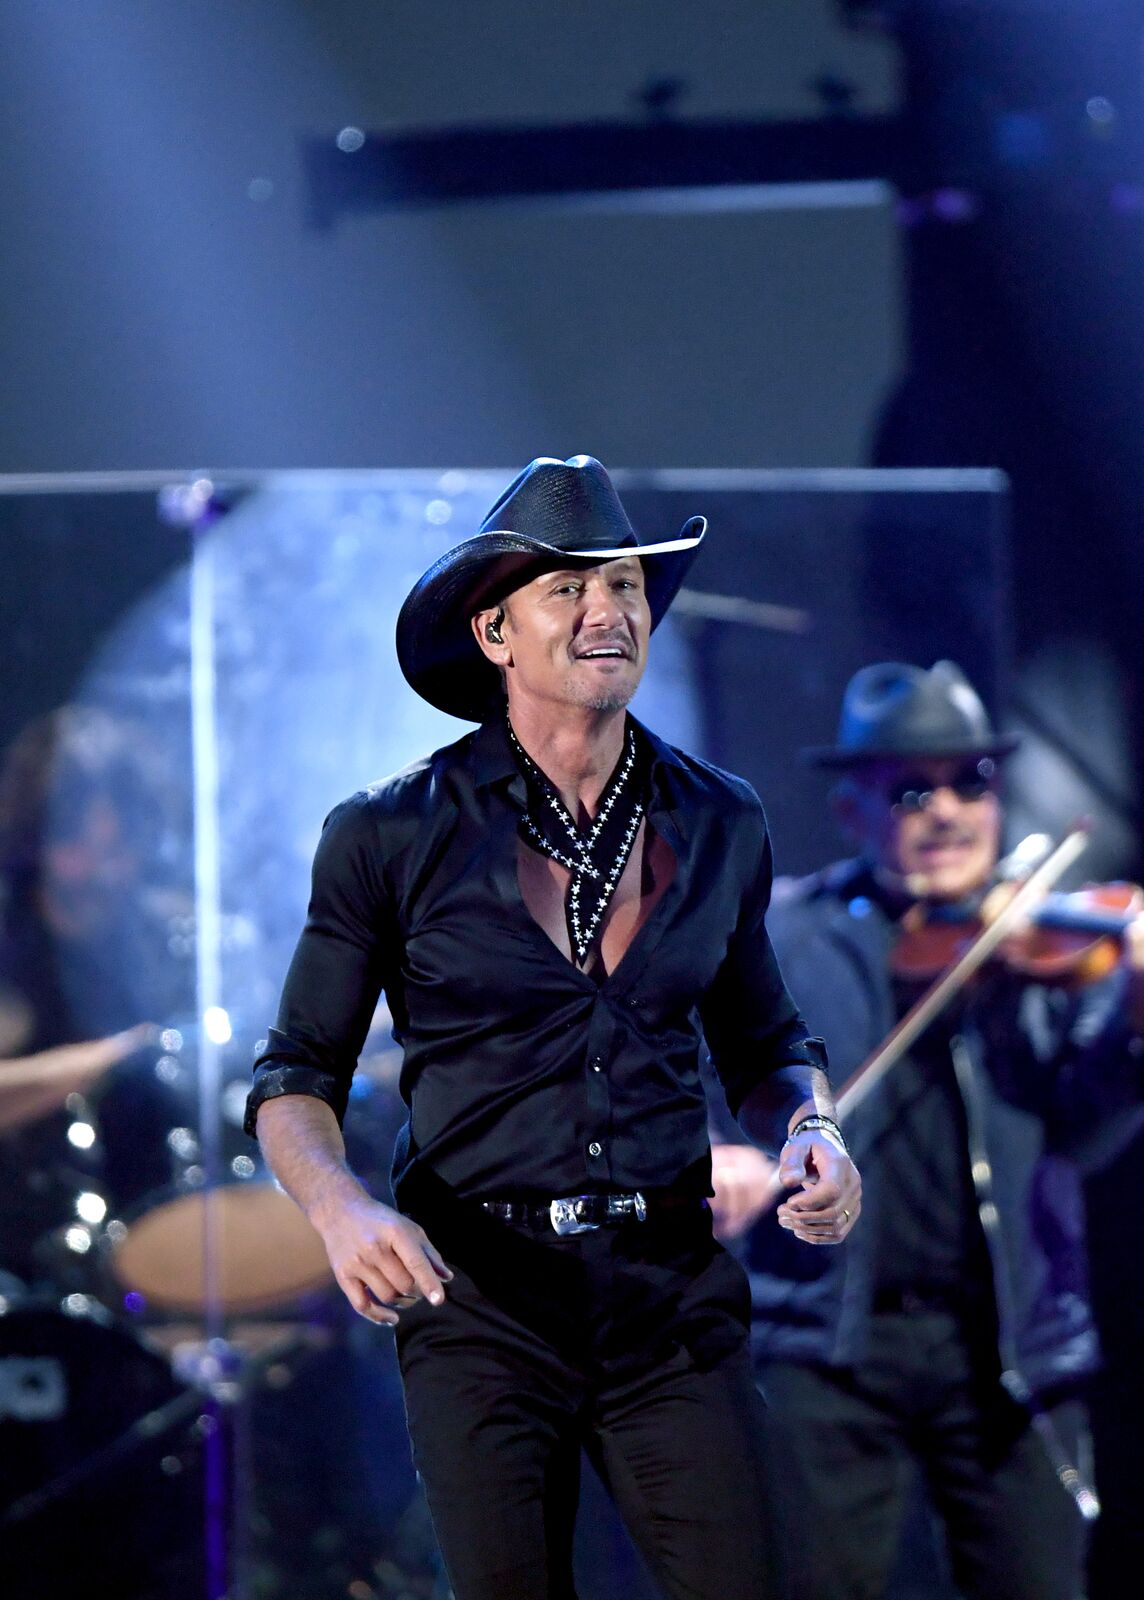 Tim McGraw onstage during the iHeartRadio Music Festival on September 20, 2019 | Photo: Getty Images